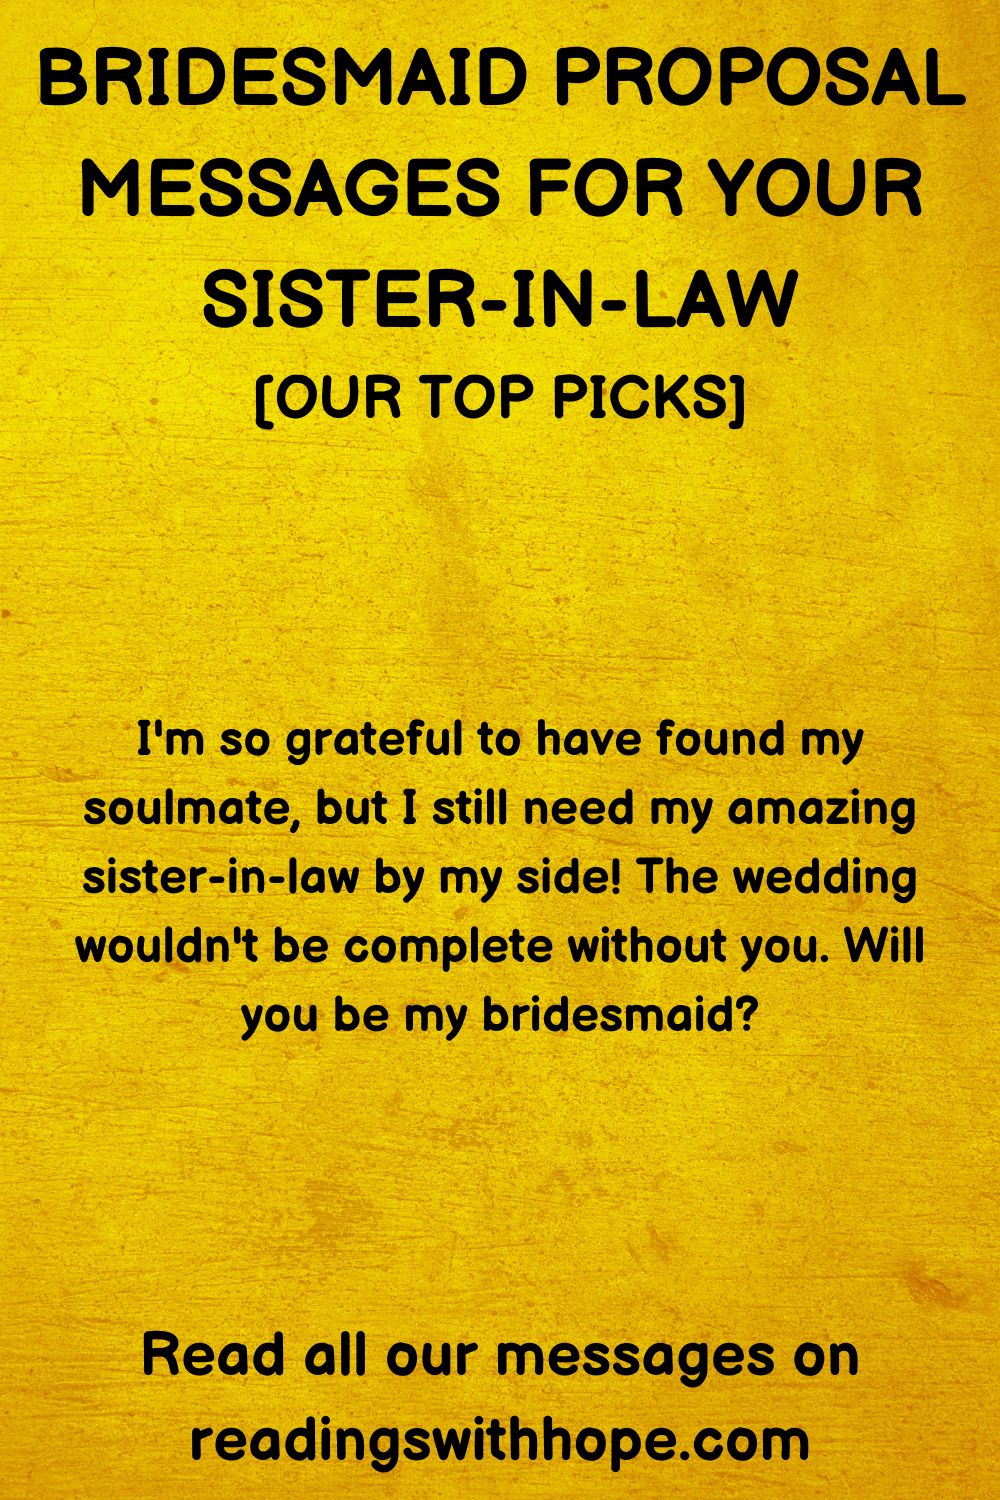 Bridesmaid Proposal Message for your Sister-In-Law